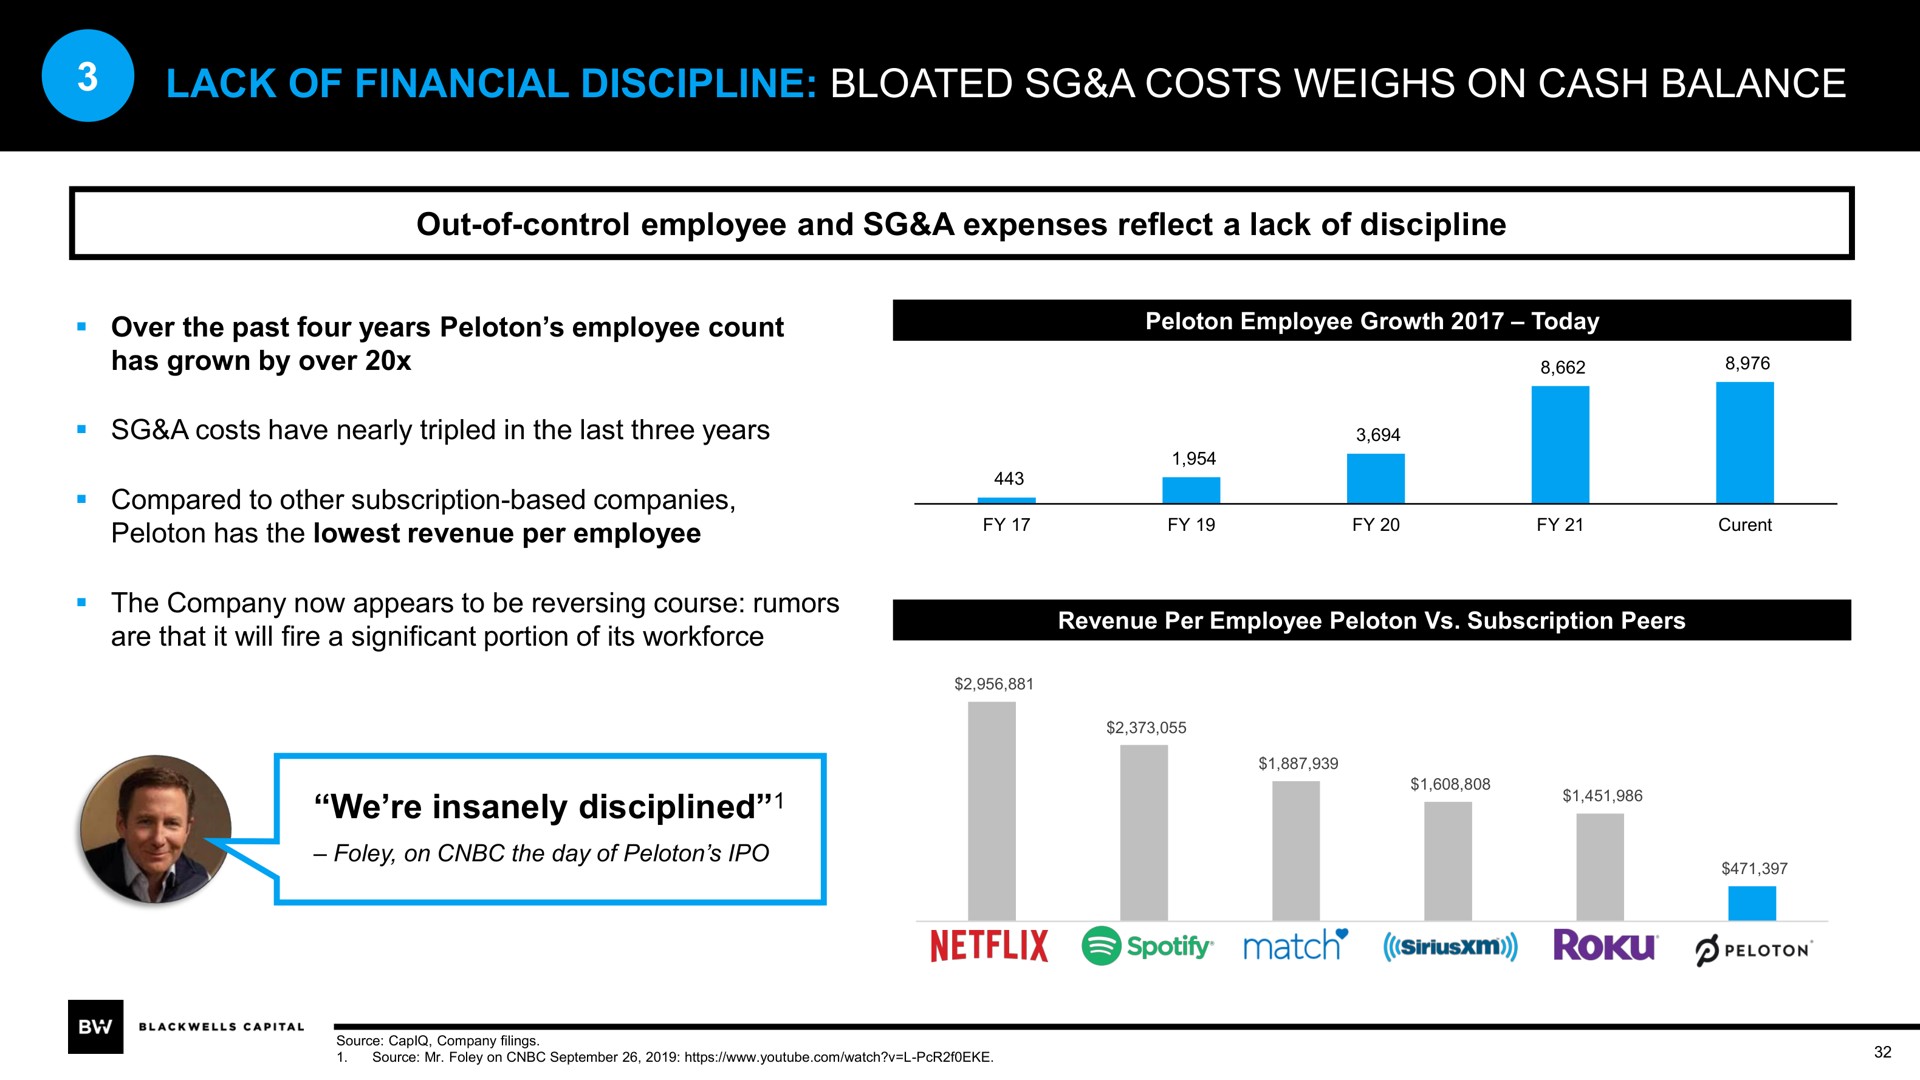 lack of financial discipline bloated a costs weighs on cash balance | Blackwells Capital